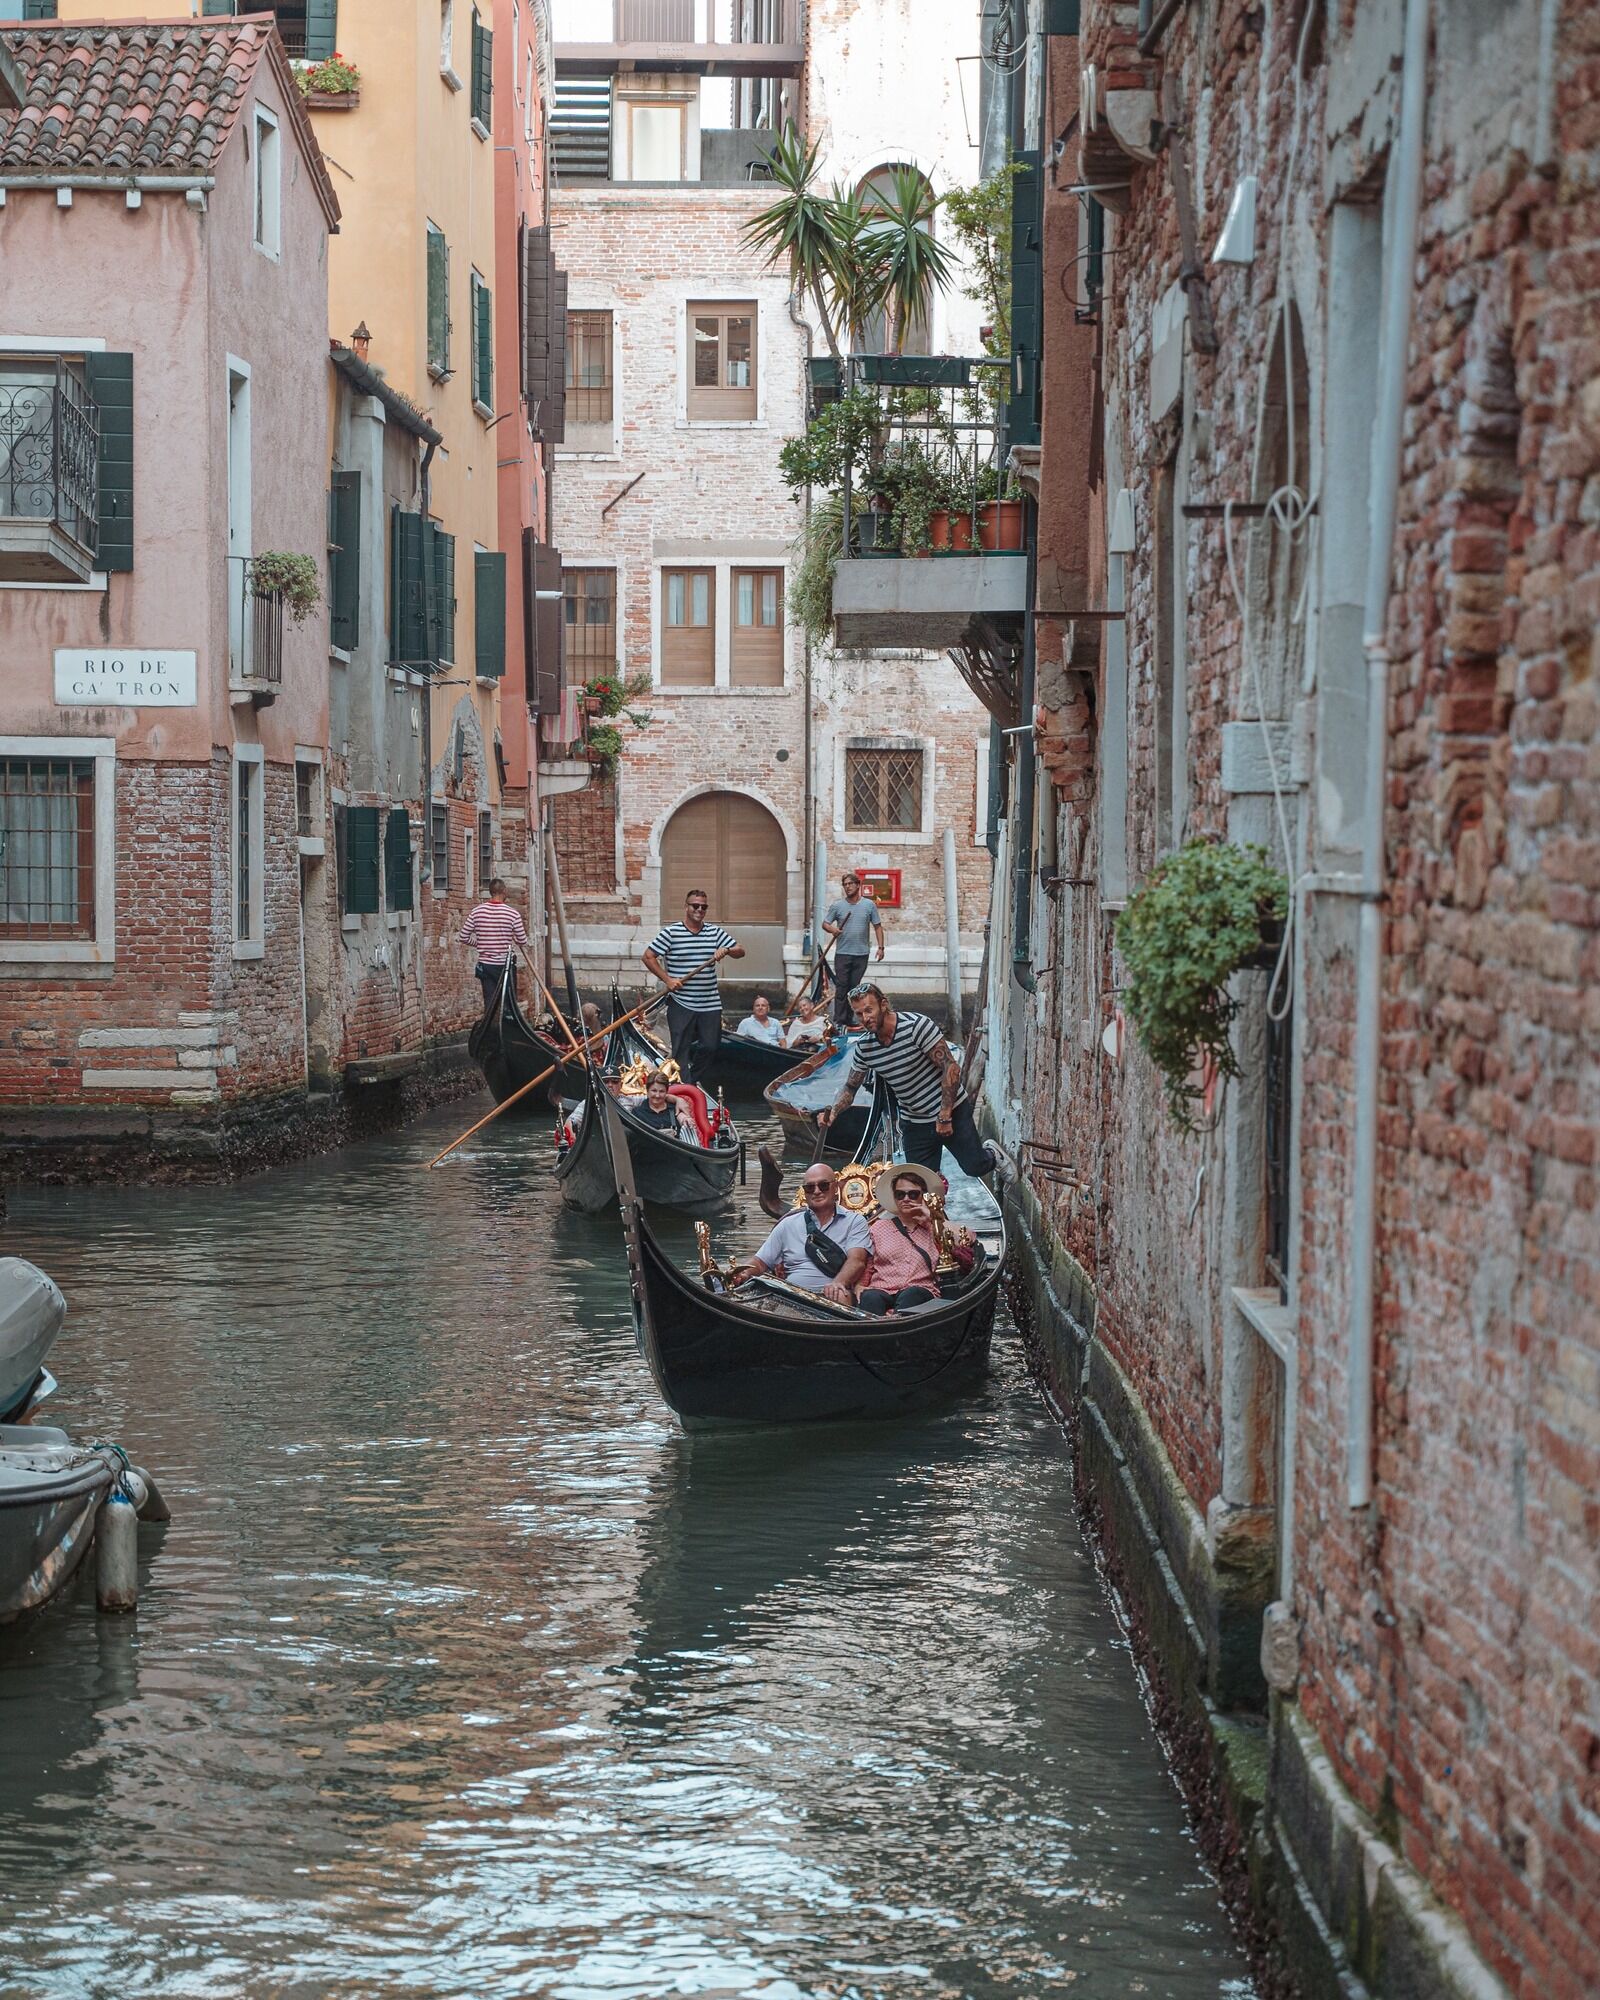 The best neighborhoods in Venice for a comfortable stay and convenient location to popular attractions